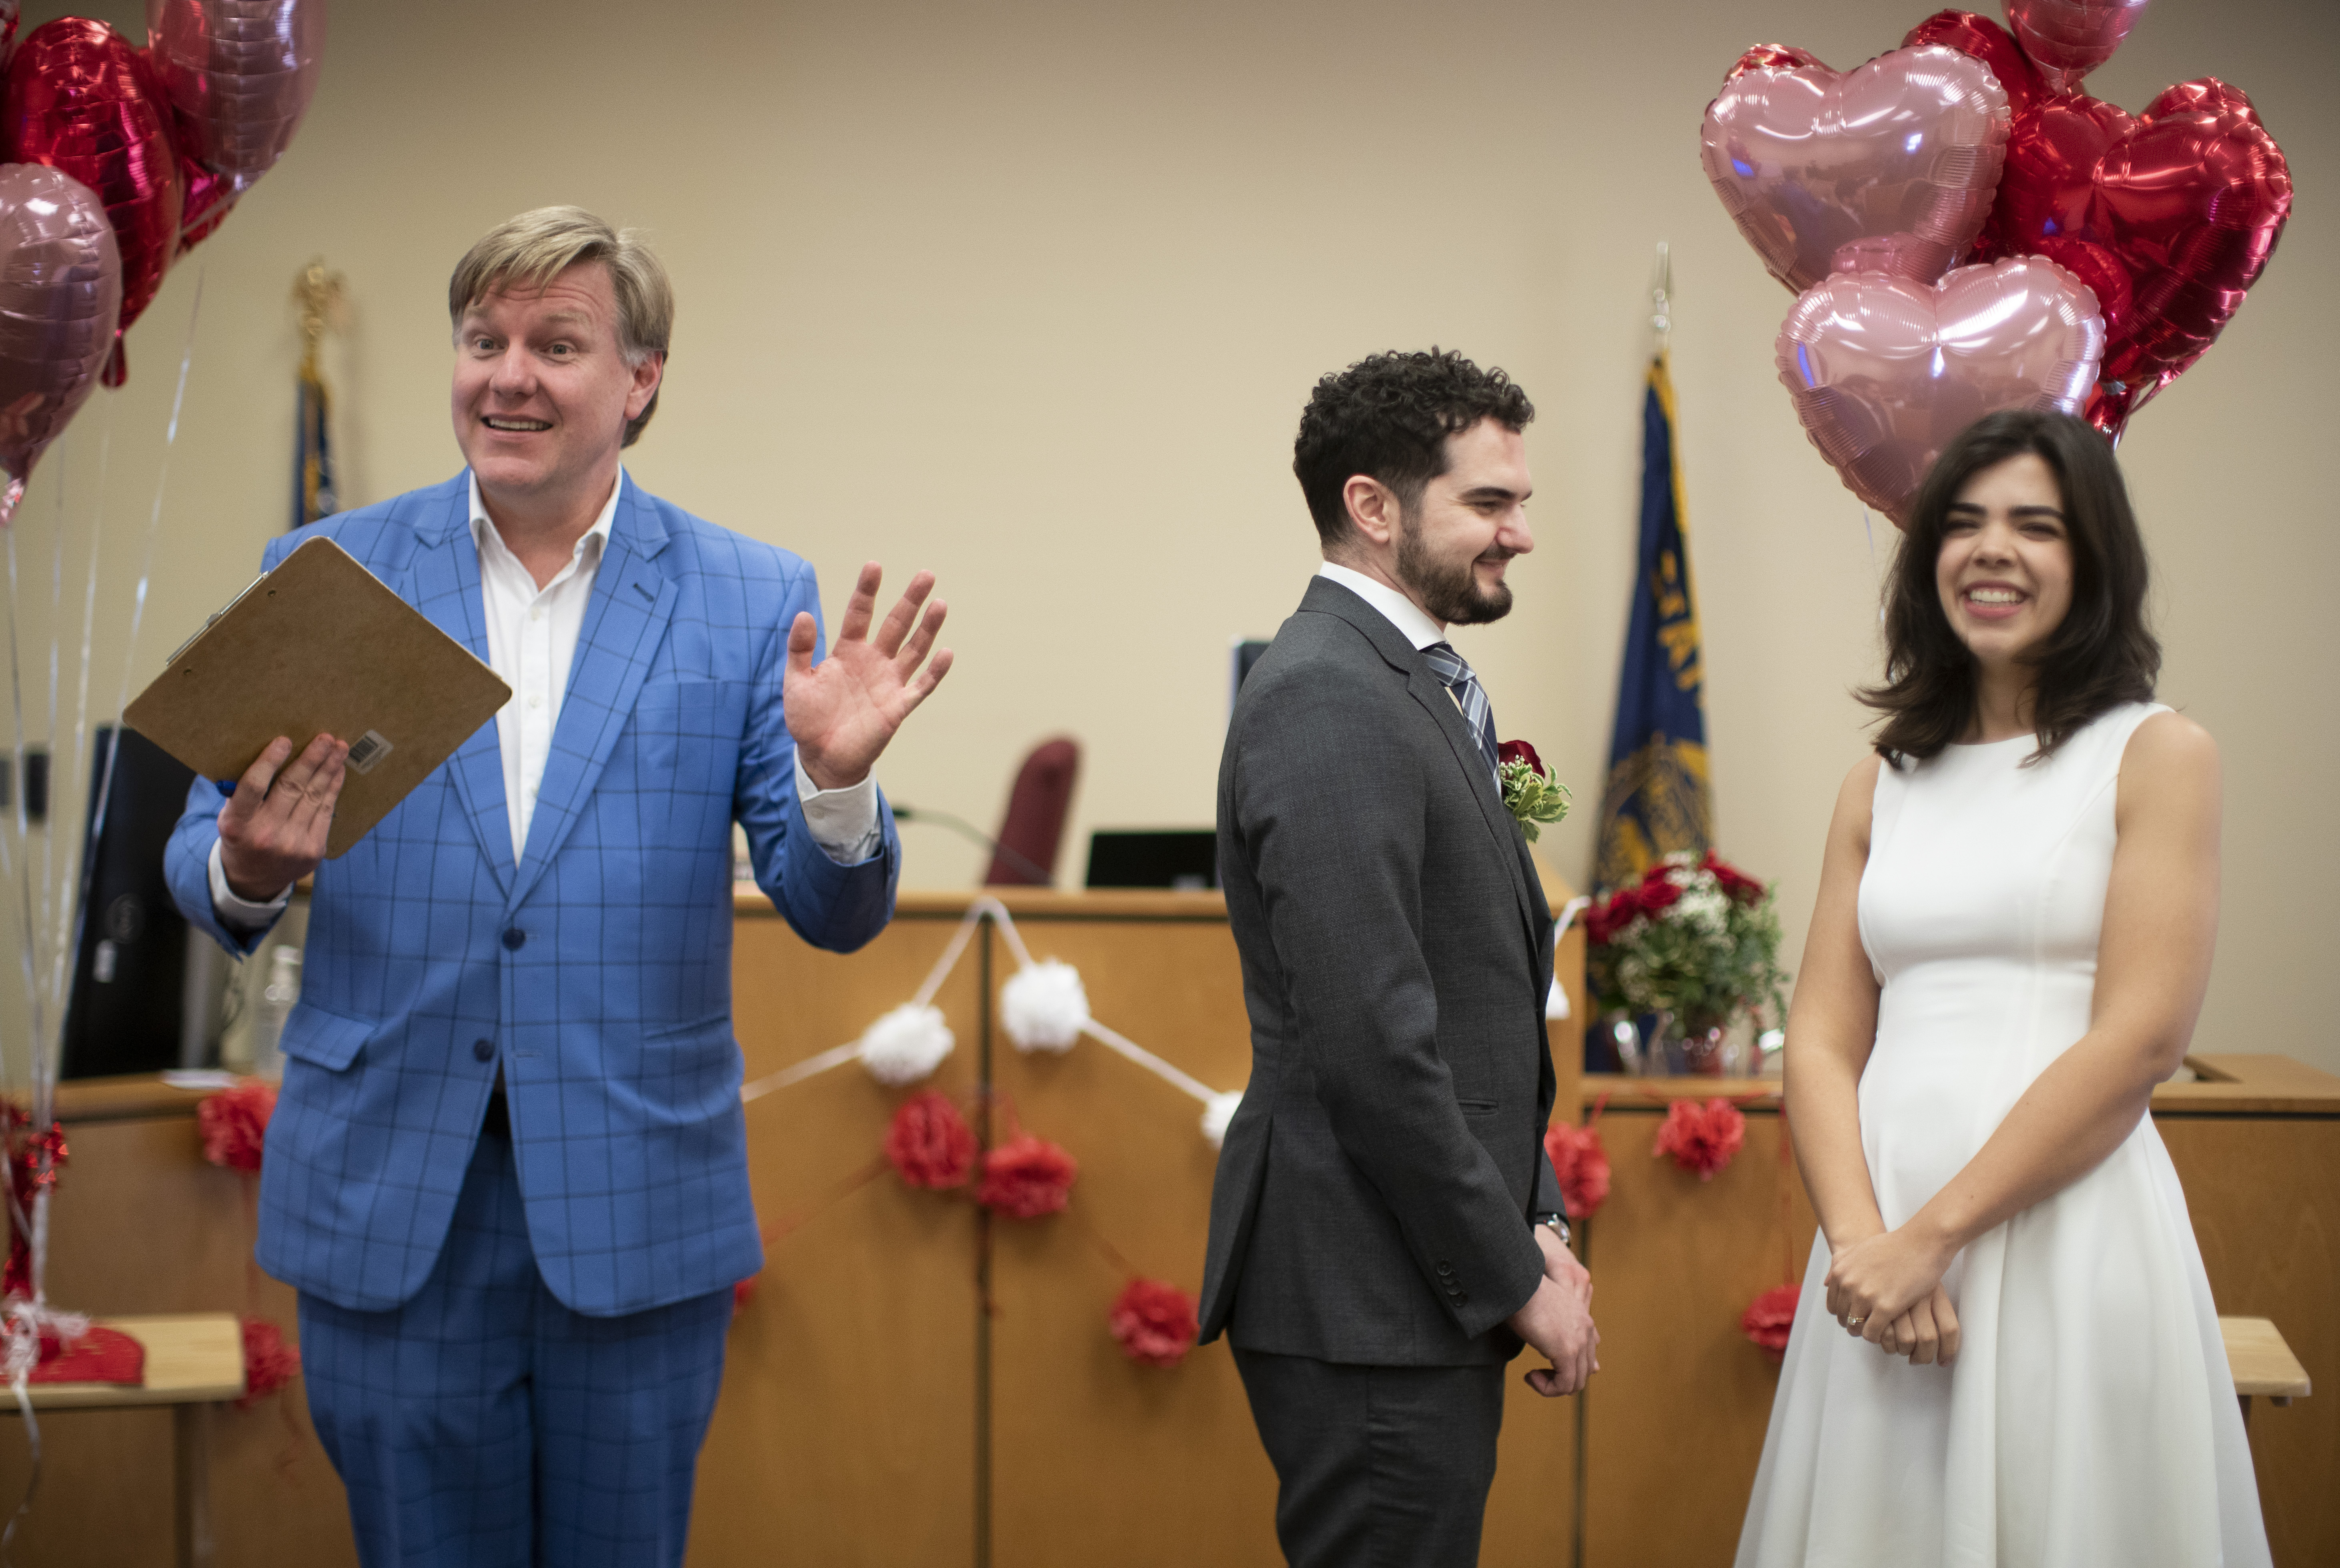 Justice of the Peace Justin Kidd officiated weddings throughout the day at the Marion County Justice Court in Salem, February 14, 2023. Beth Nakamura/The Oregonian